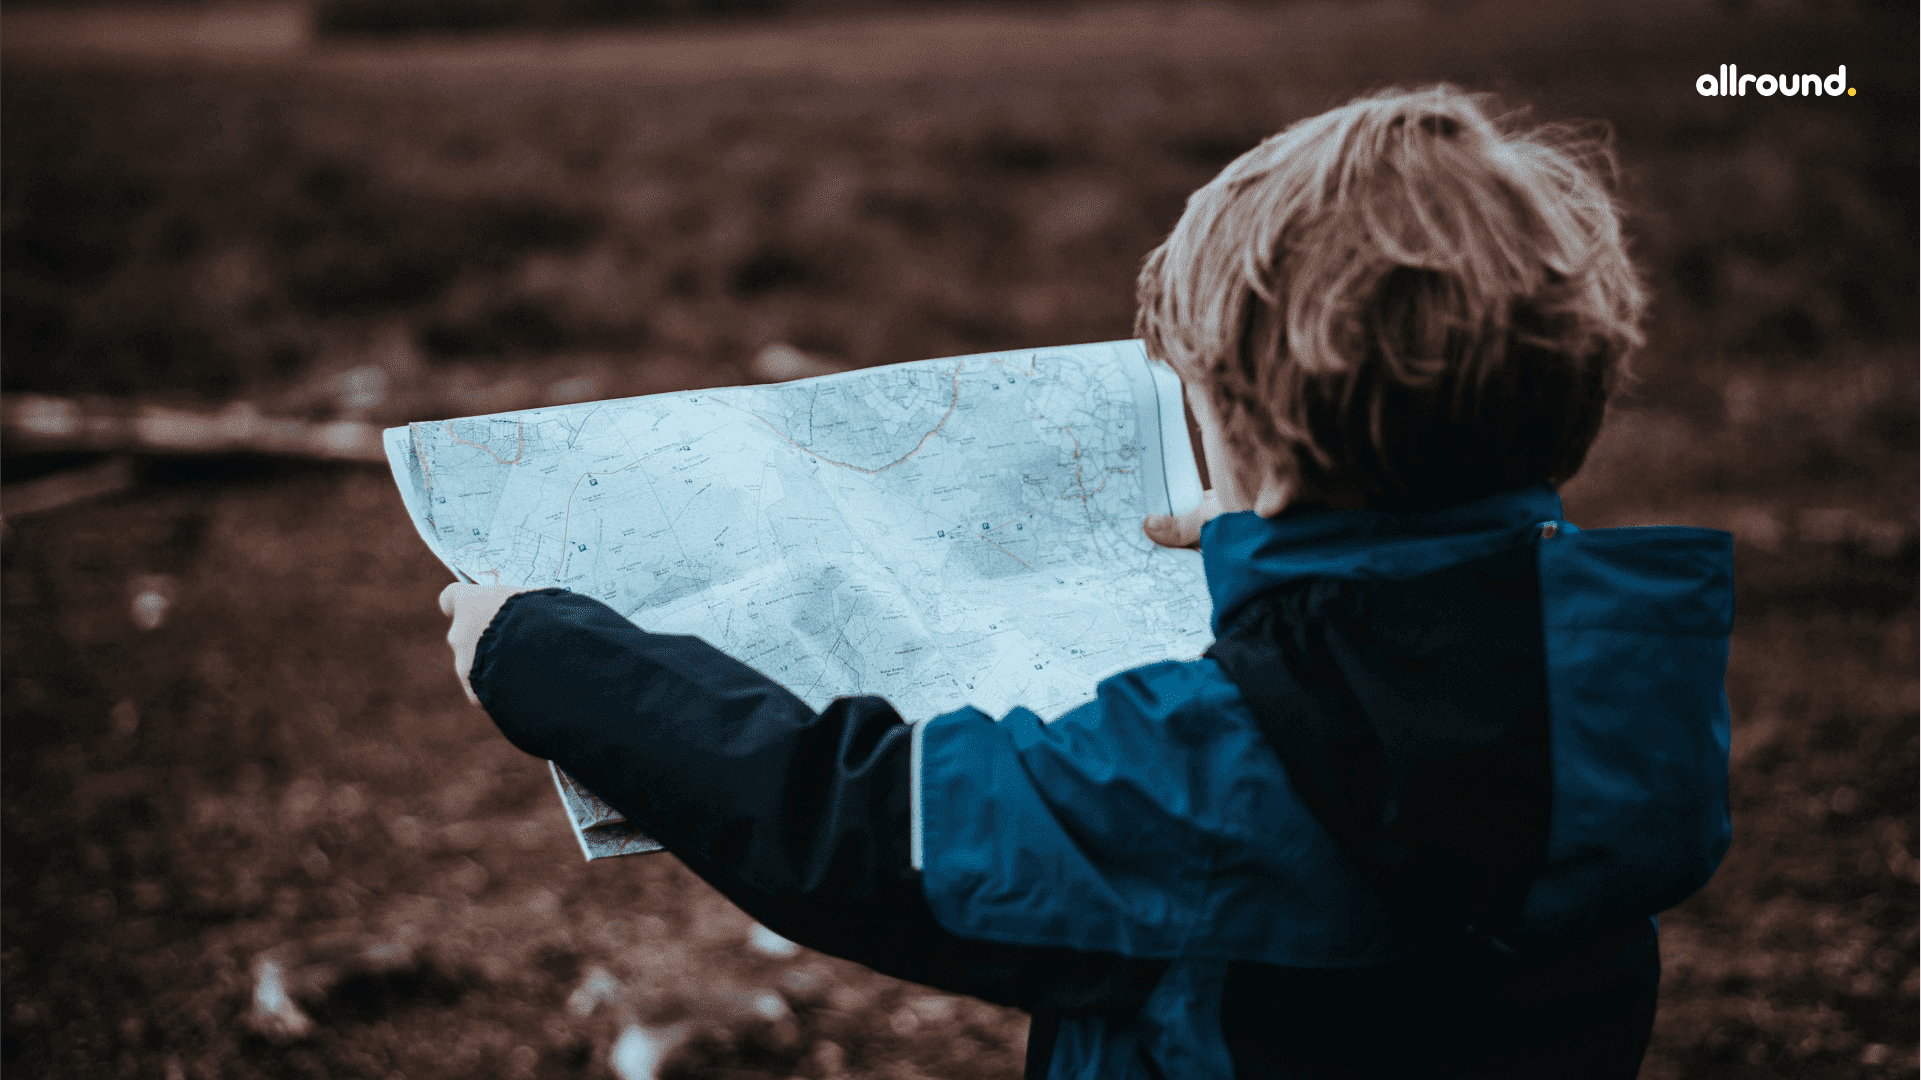 6 Educational Trip Ideas Your Kids Will Love